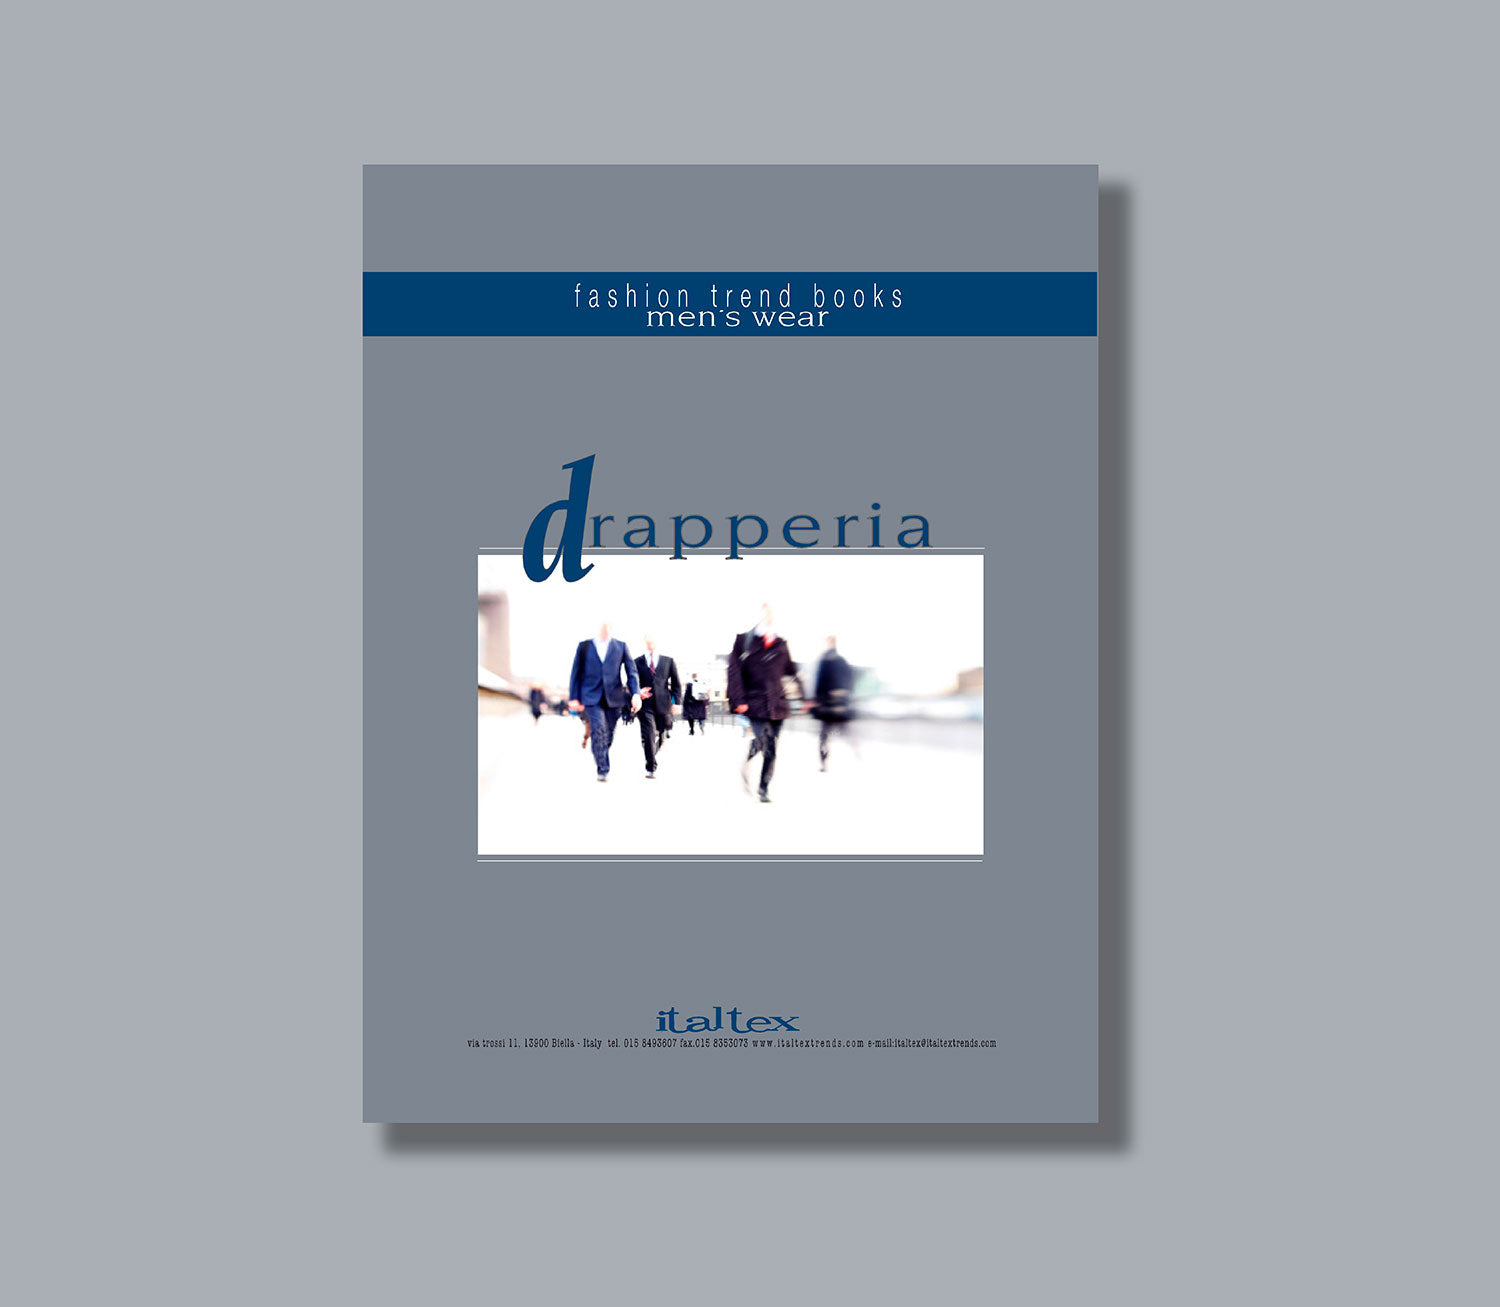 A blue and grey cover for the men's wear trend book Menswear Drapperia, with a blurred image of people walking along a street